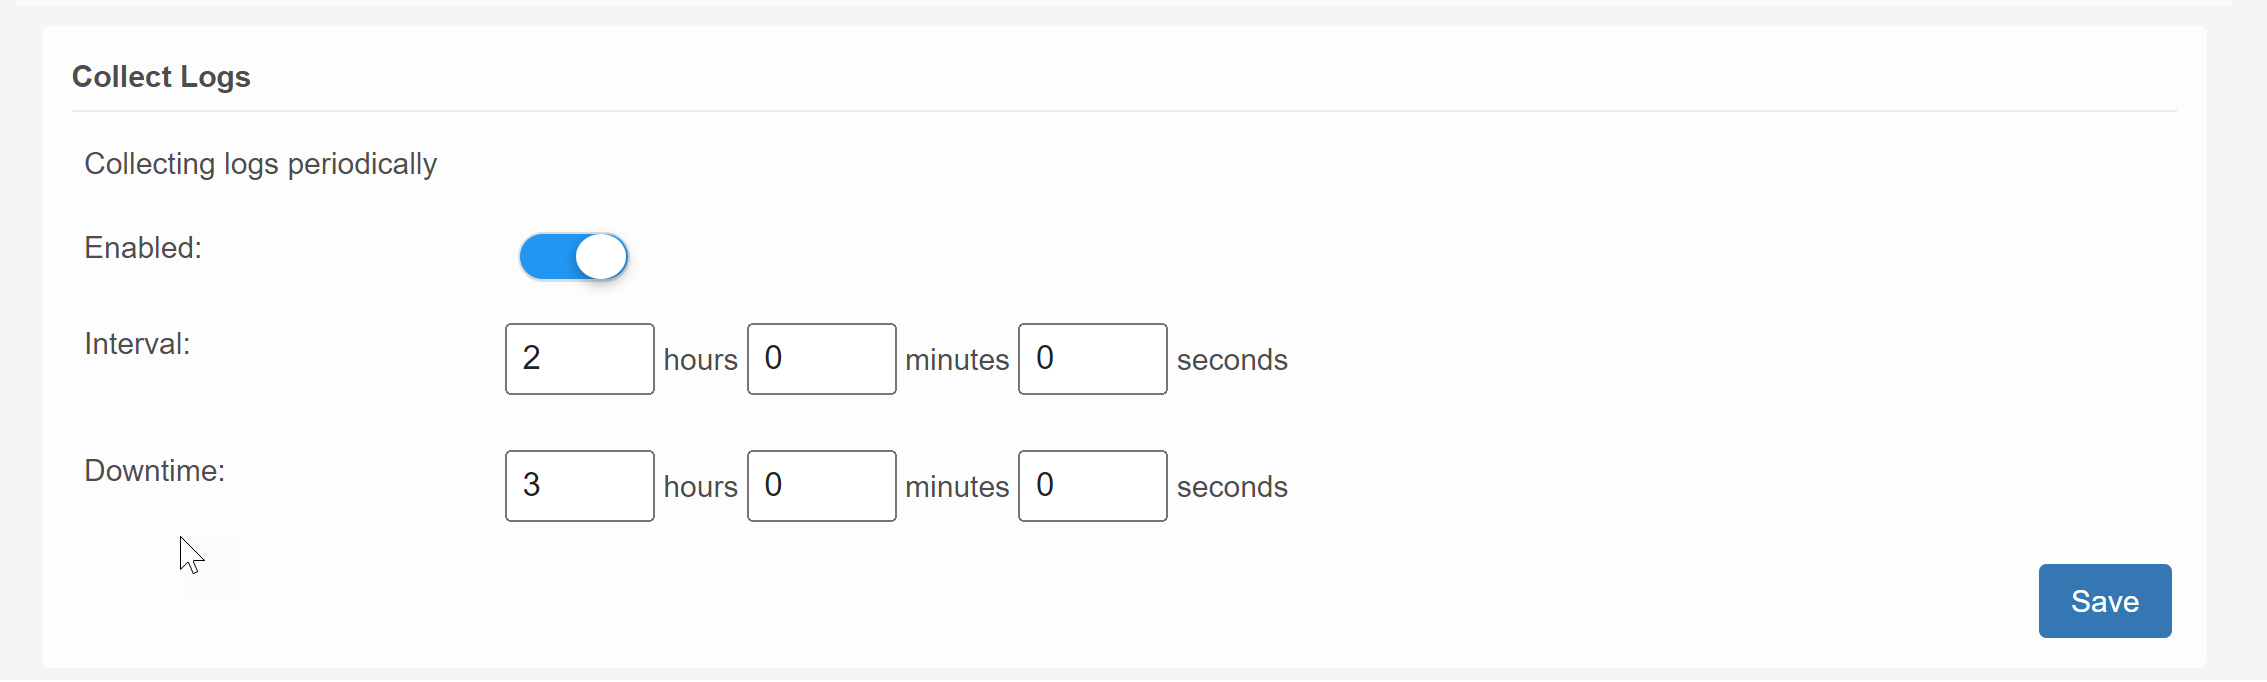 Collect Logs job is enabled. The configured interval for this job is 2 hours and downtime is 3 hours.